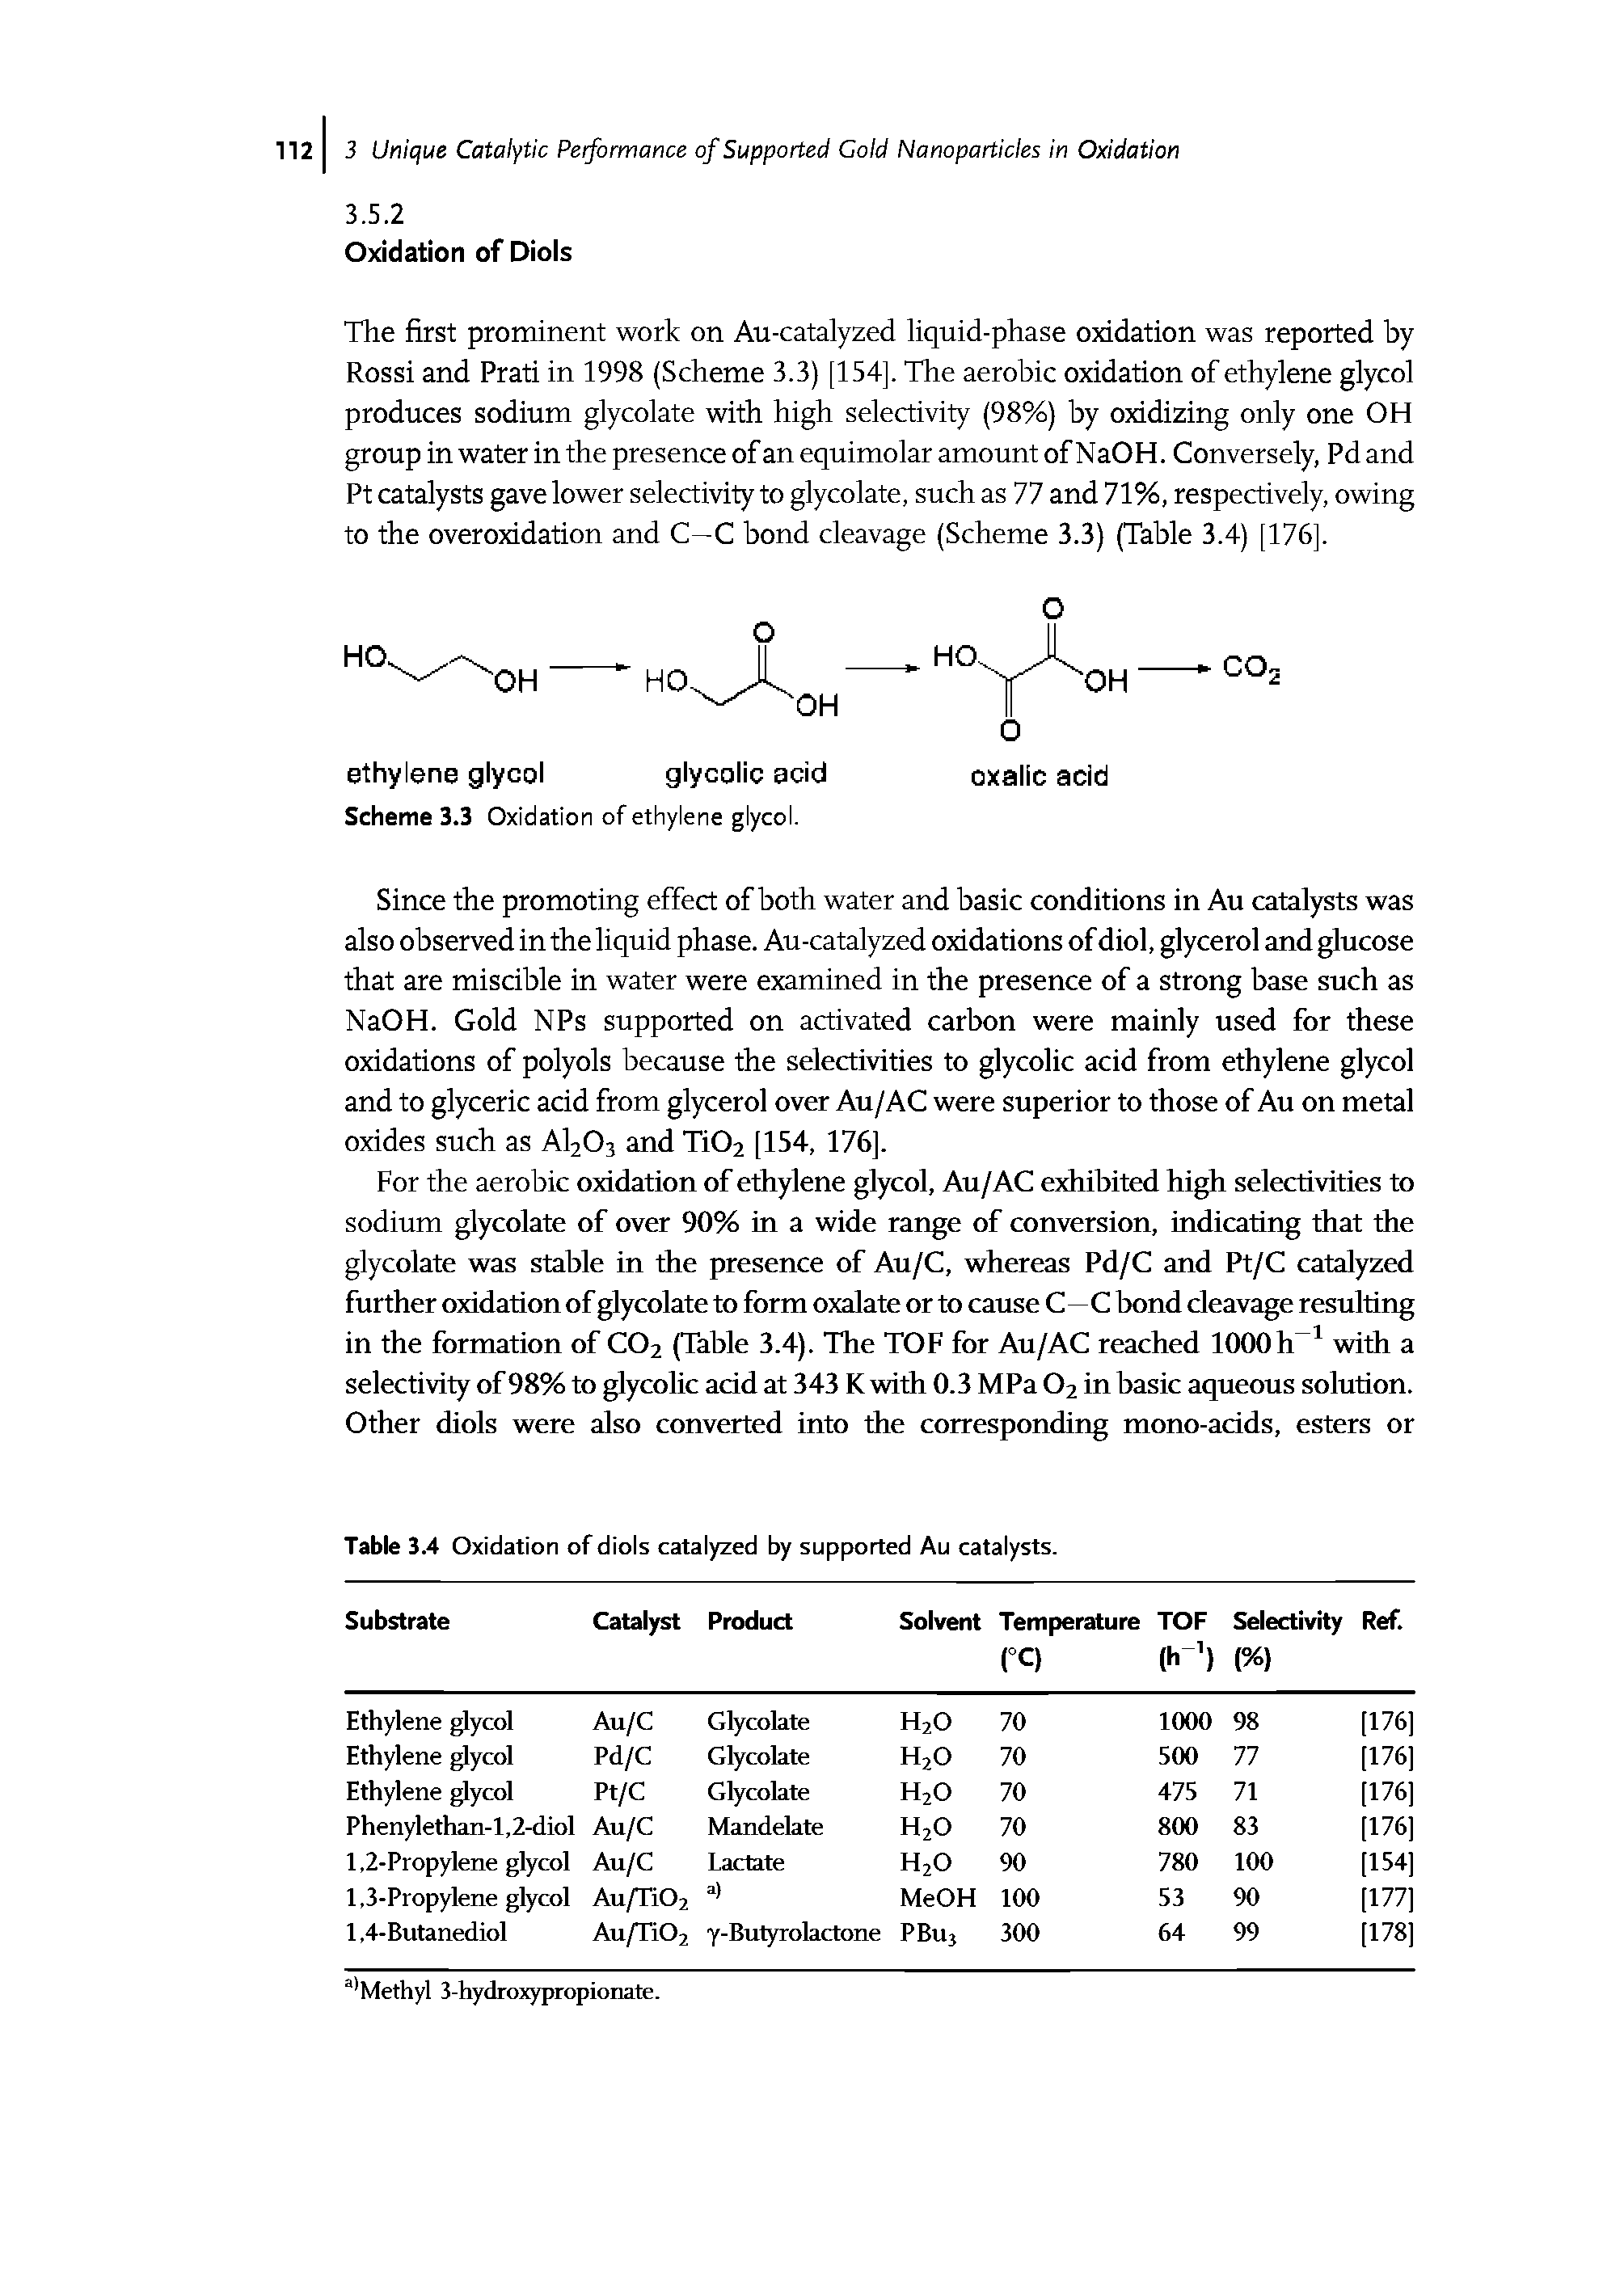 Table 3.4 Oxidation of diols catalyzed by supported Au catalysts.